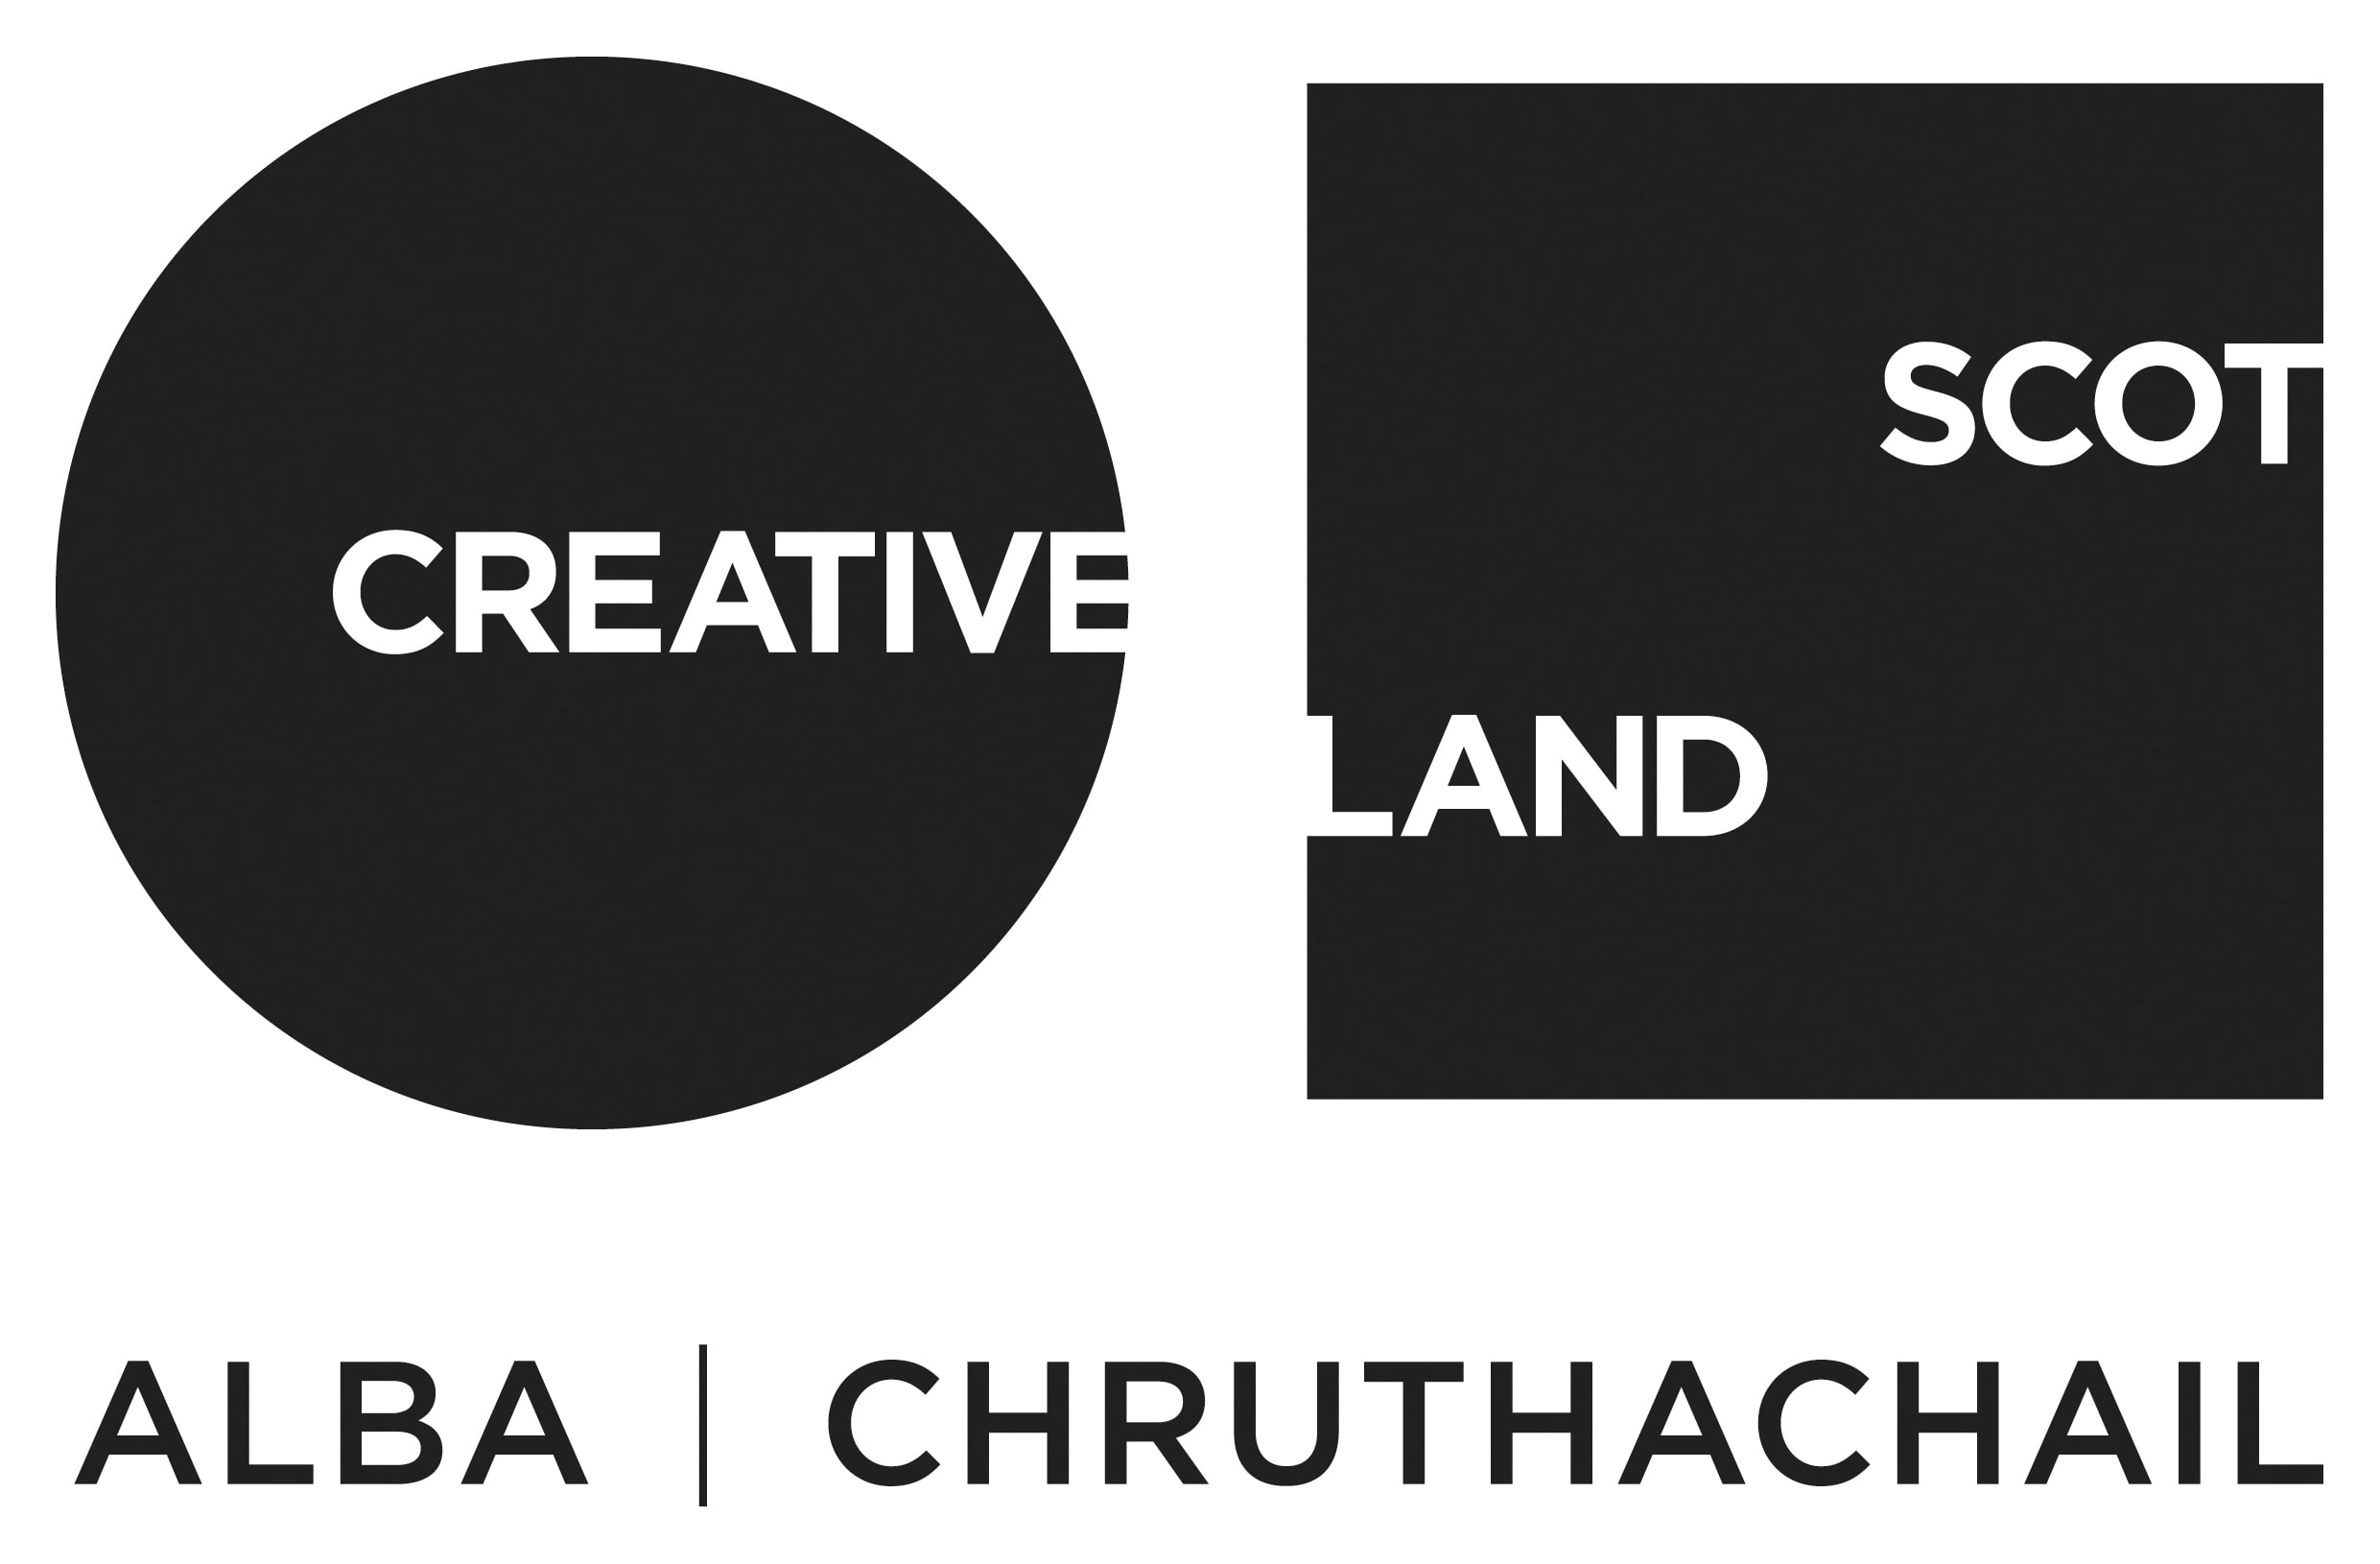 The Creative Scotland logo is a black circle with Creative written in white capital letters and a black square with the word Scotland split in half and written in white capitals at the top right and bottom left. The name is in gaelic underneath Alba Chruthachail